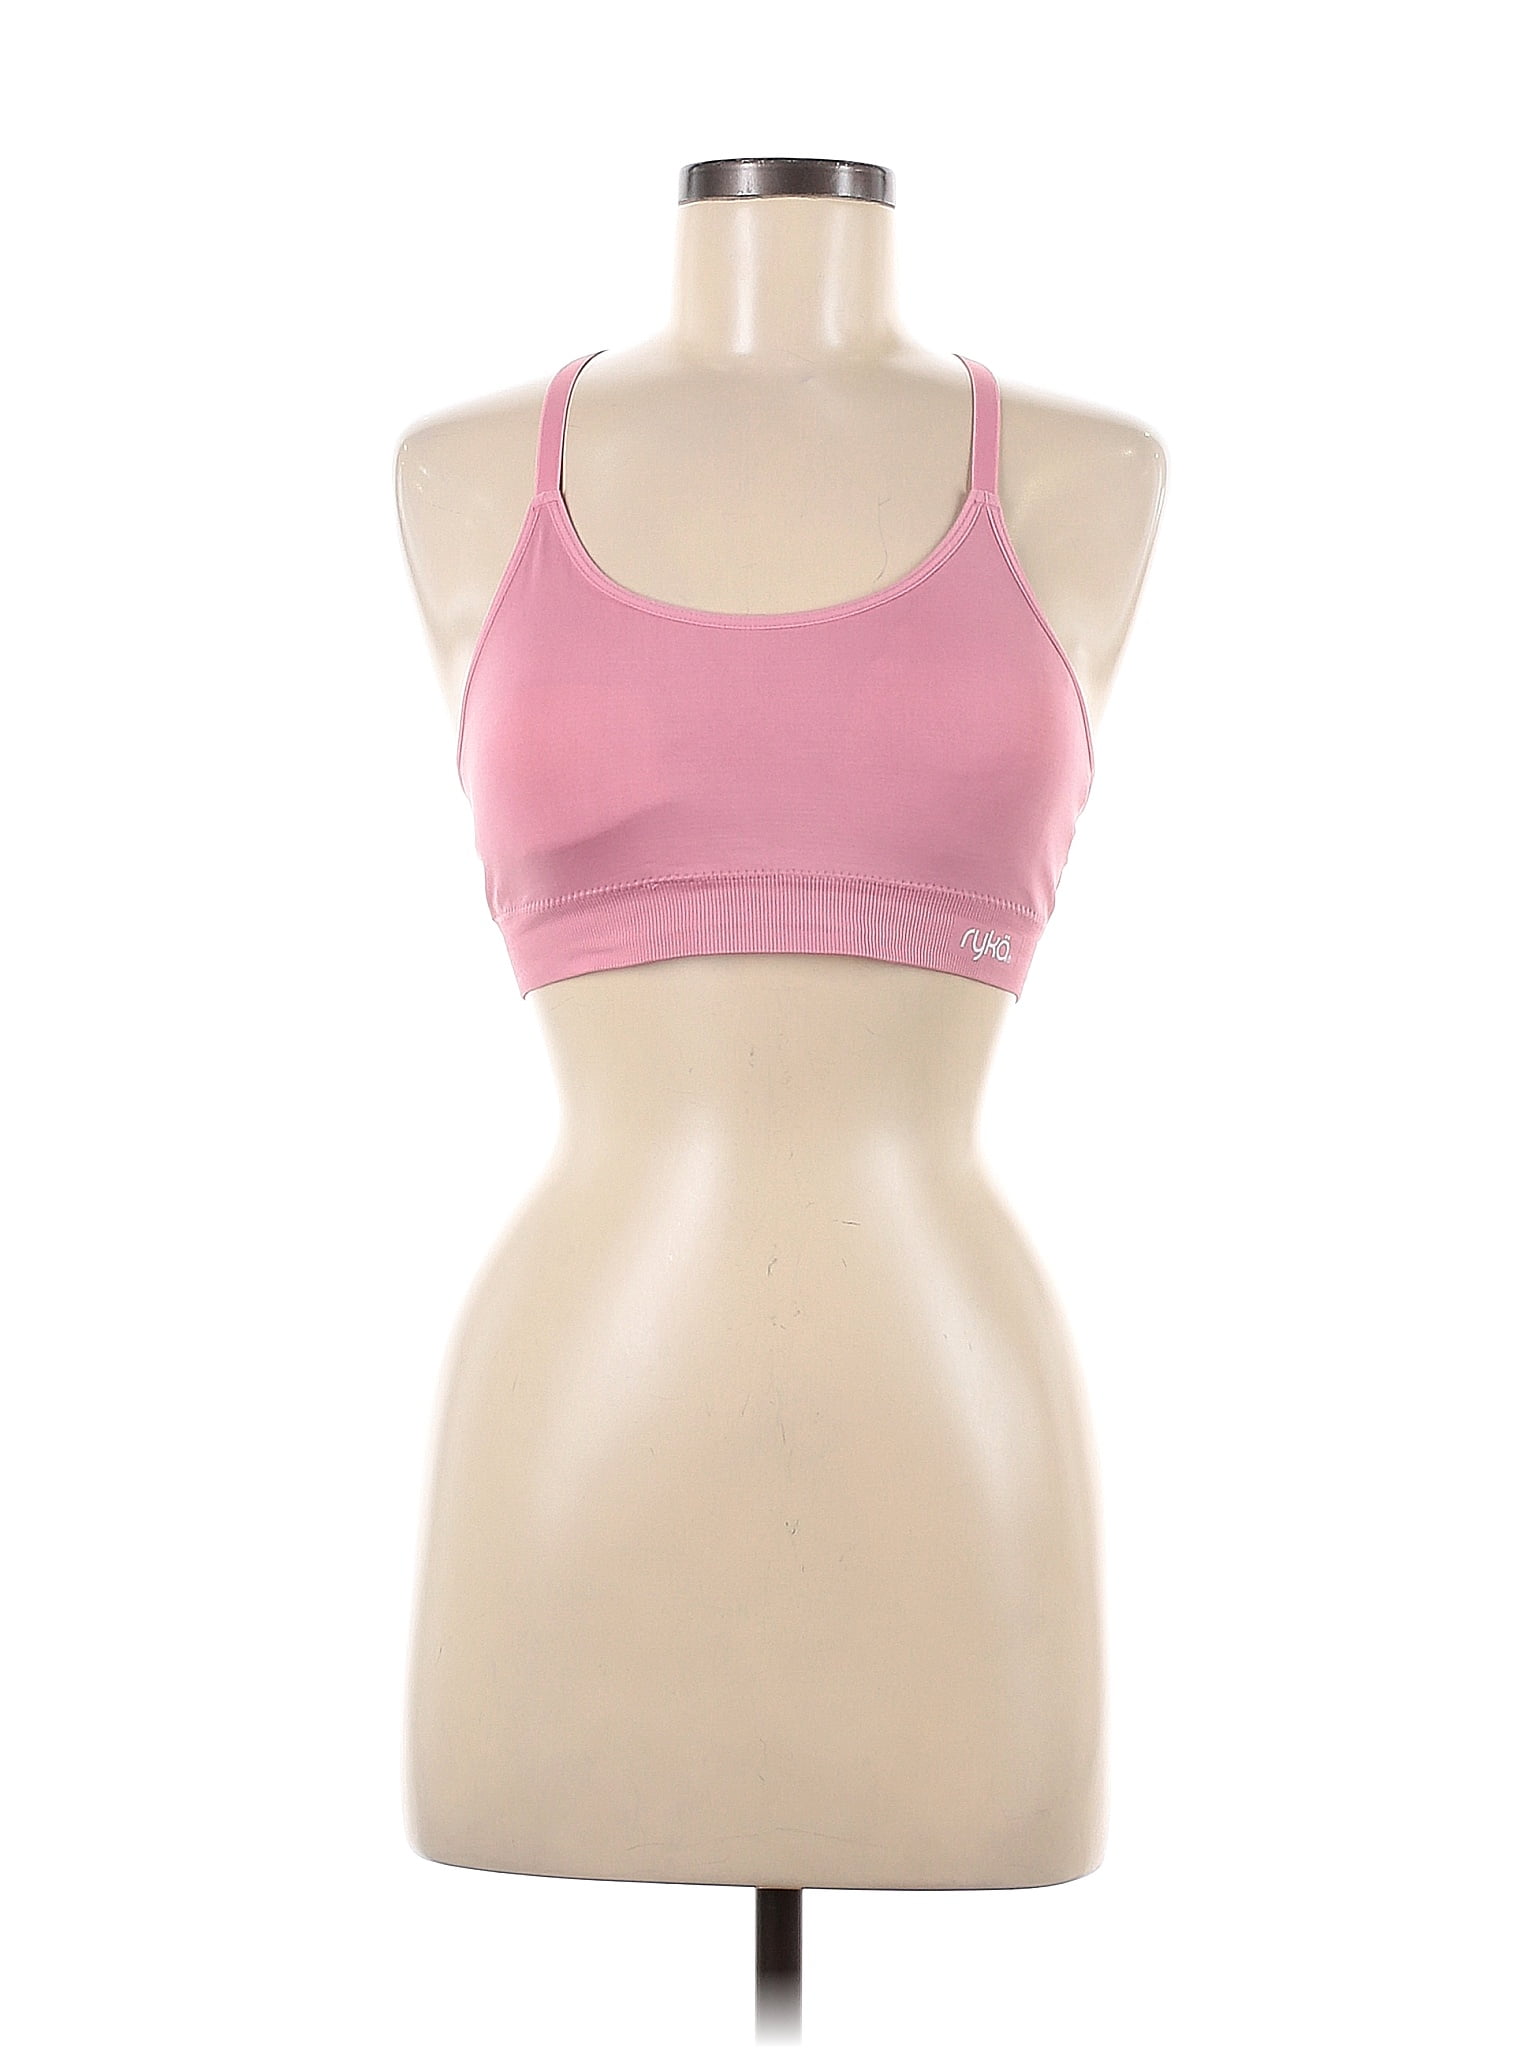 Ryka Women's Sports Bras On Sale Up To 90% Off Retail